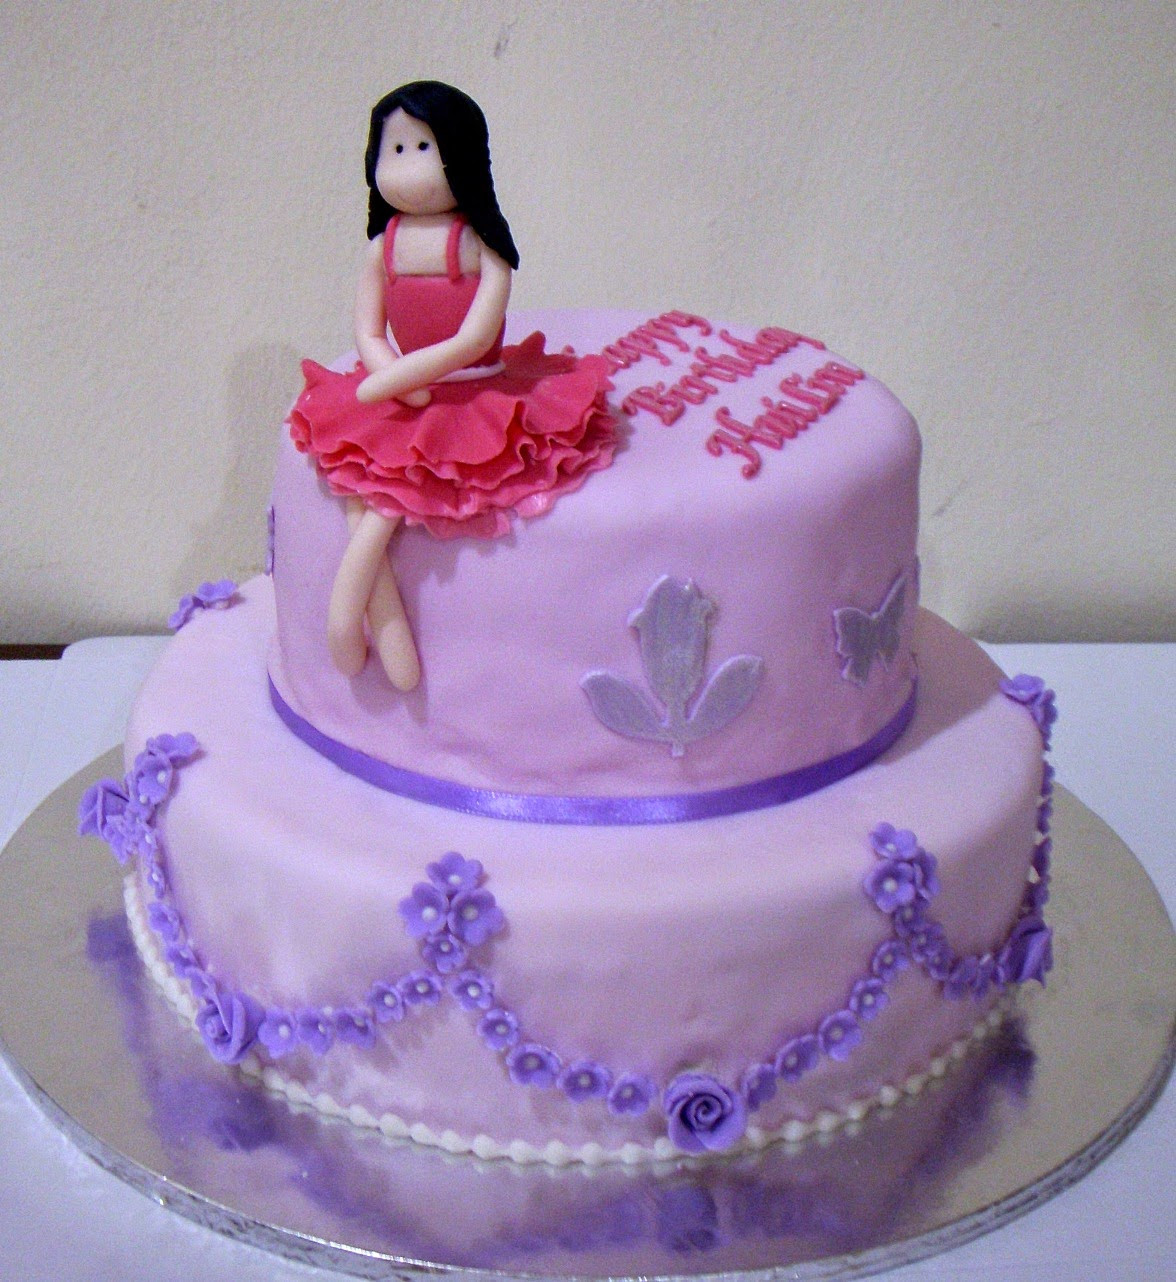 A Picture Of A Birthday Cake
 Top 77 s Cakes For Birthday Girls